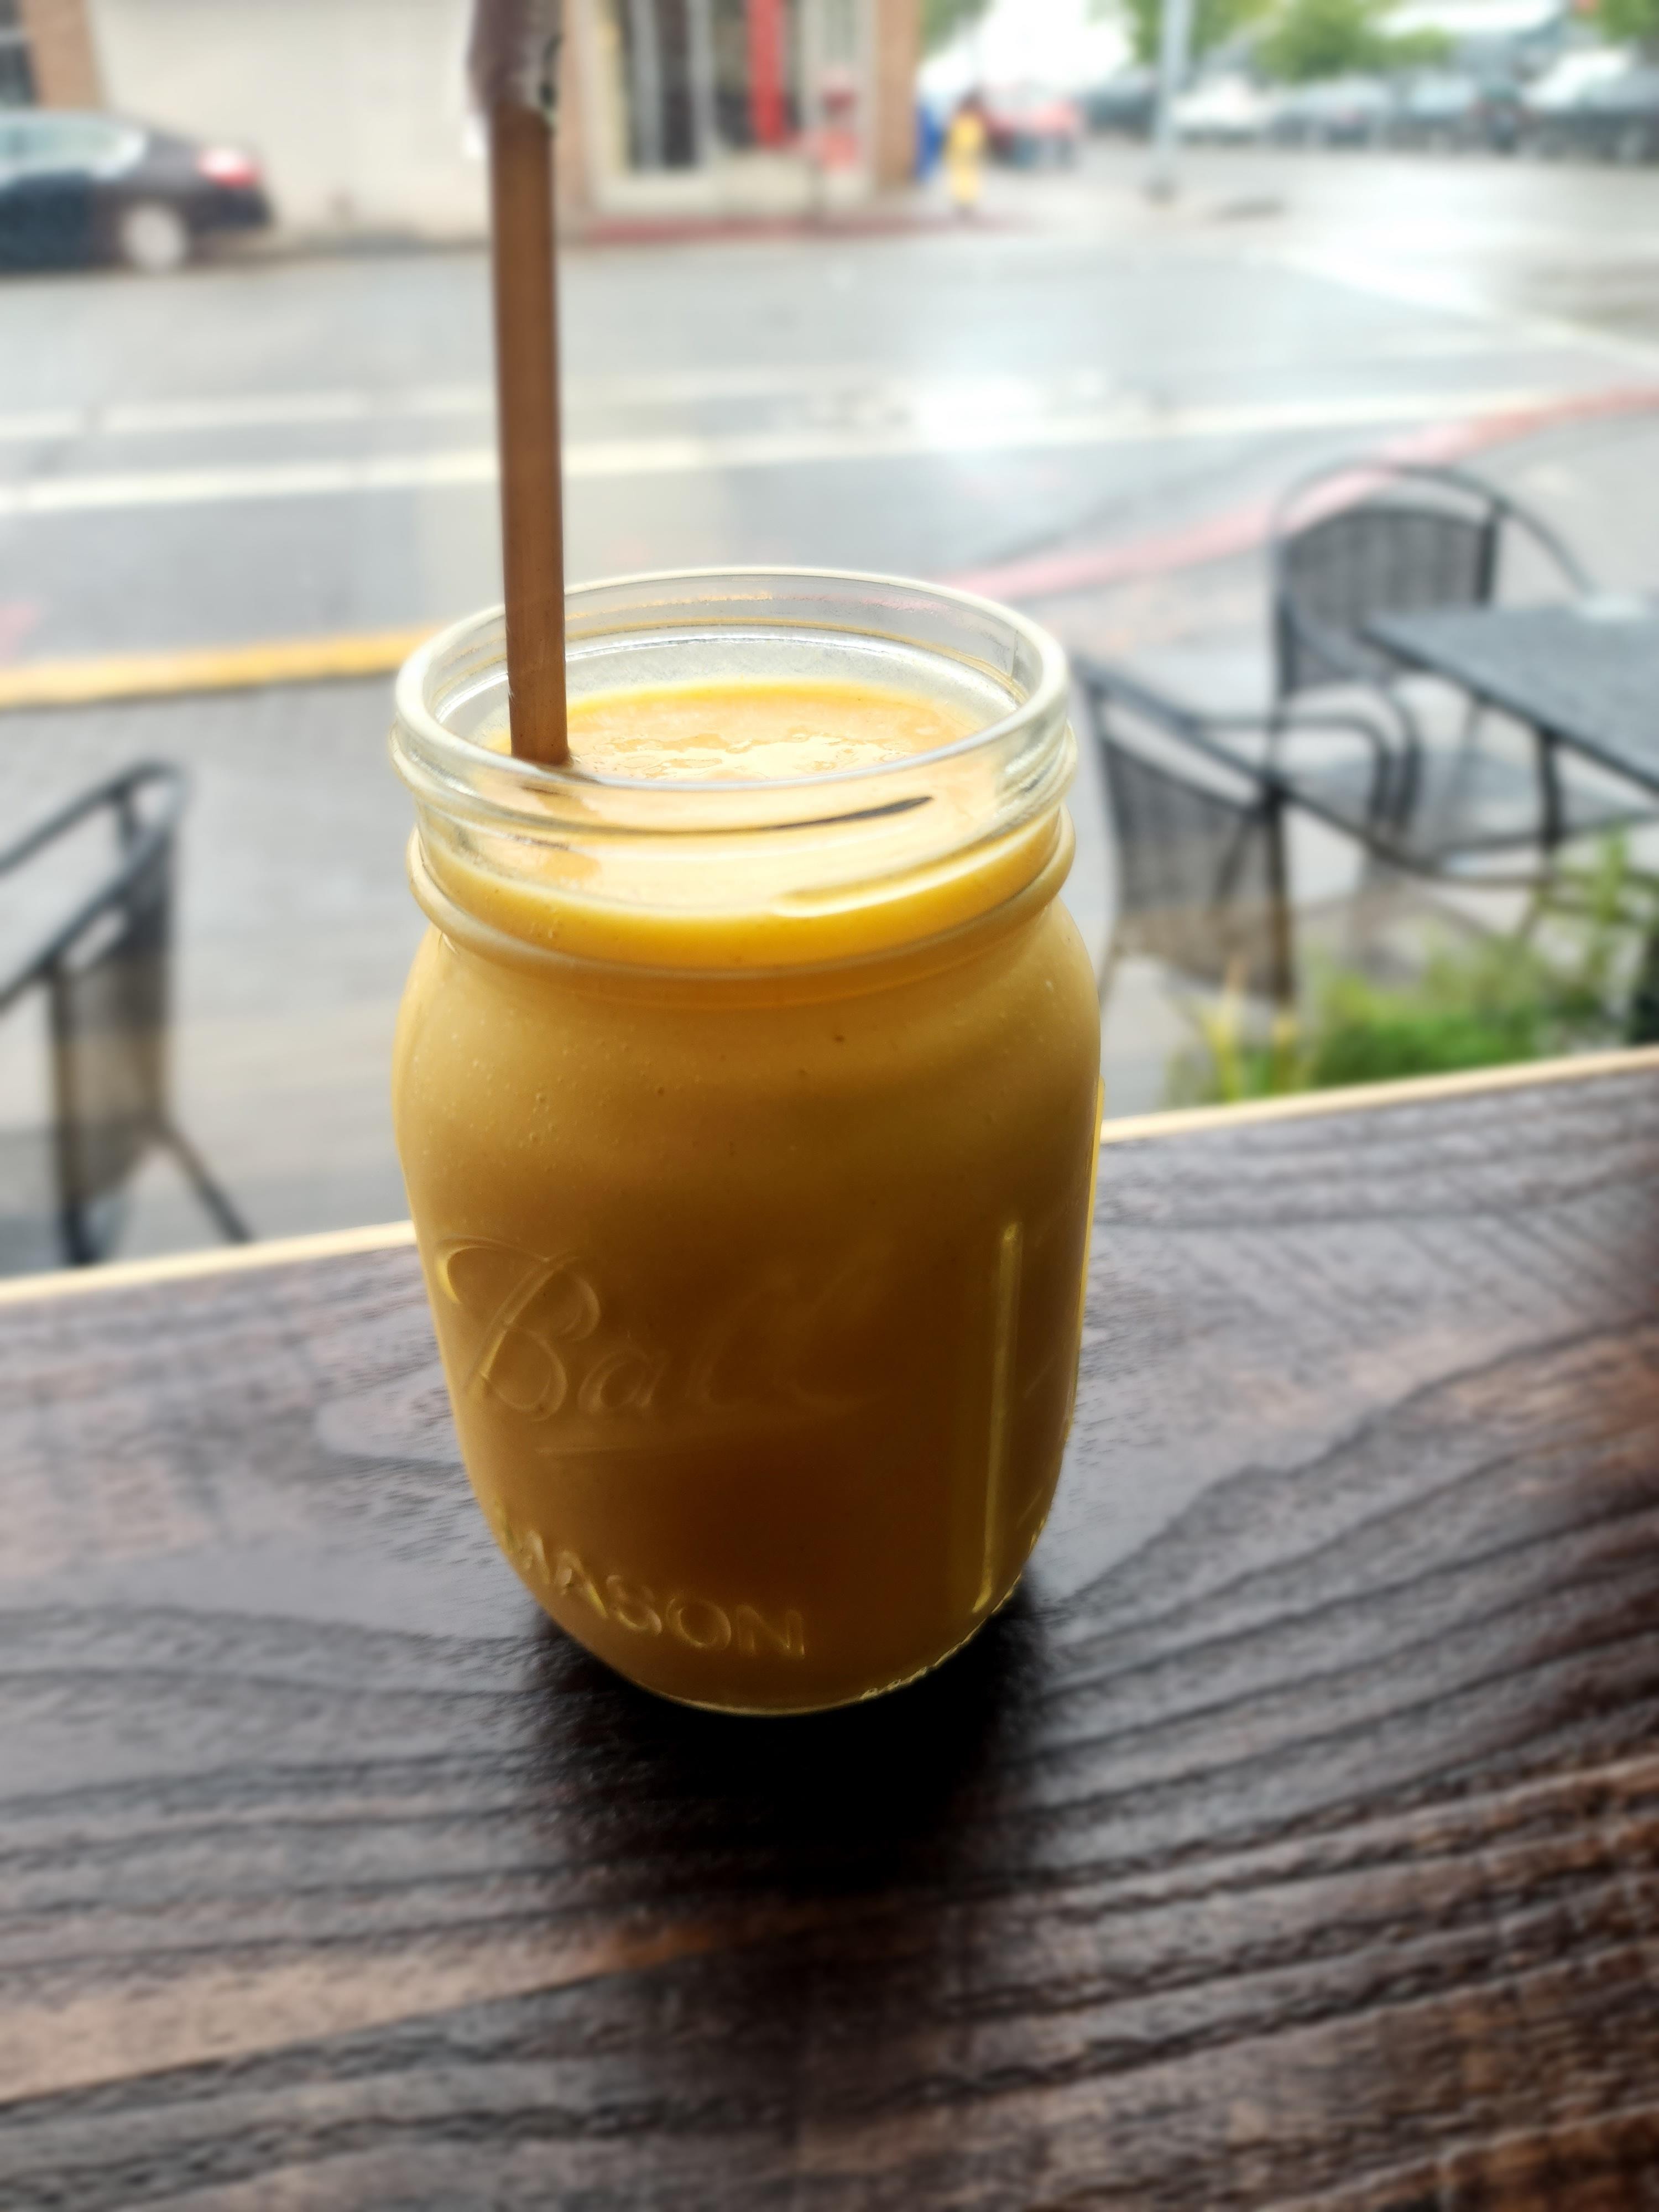 Breakout the Turmeric Smoothie